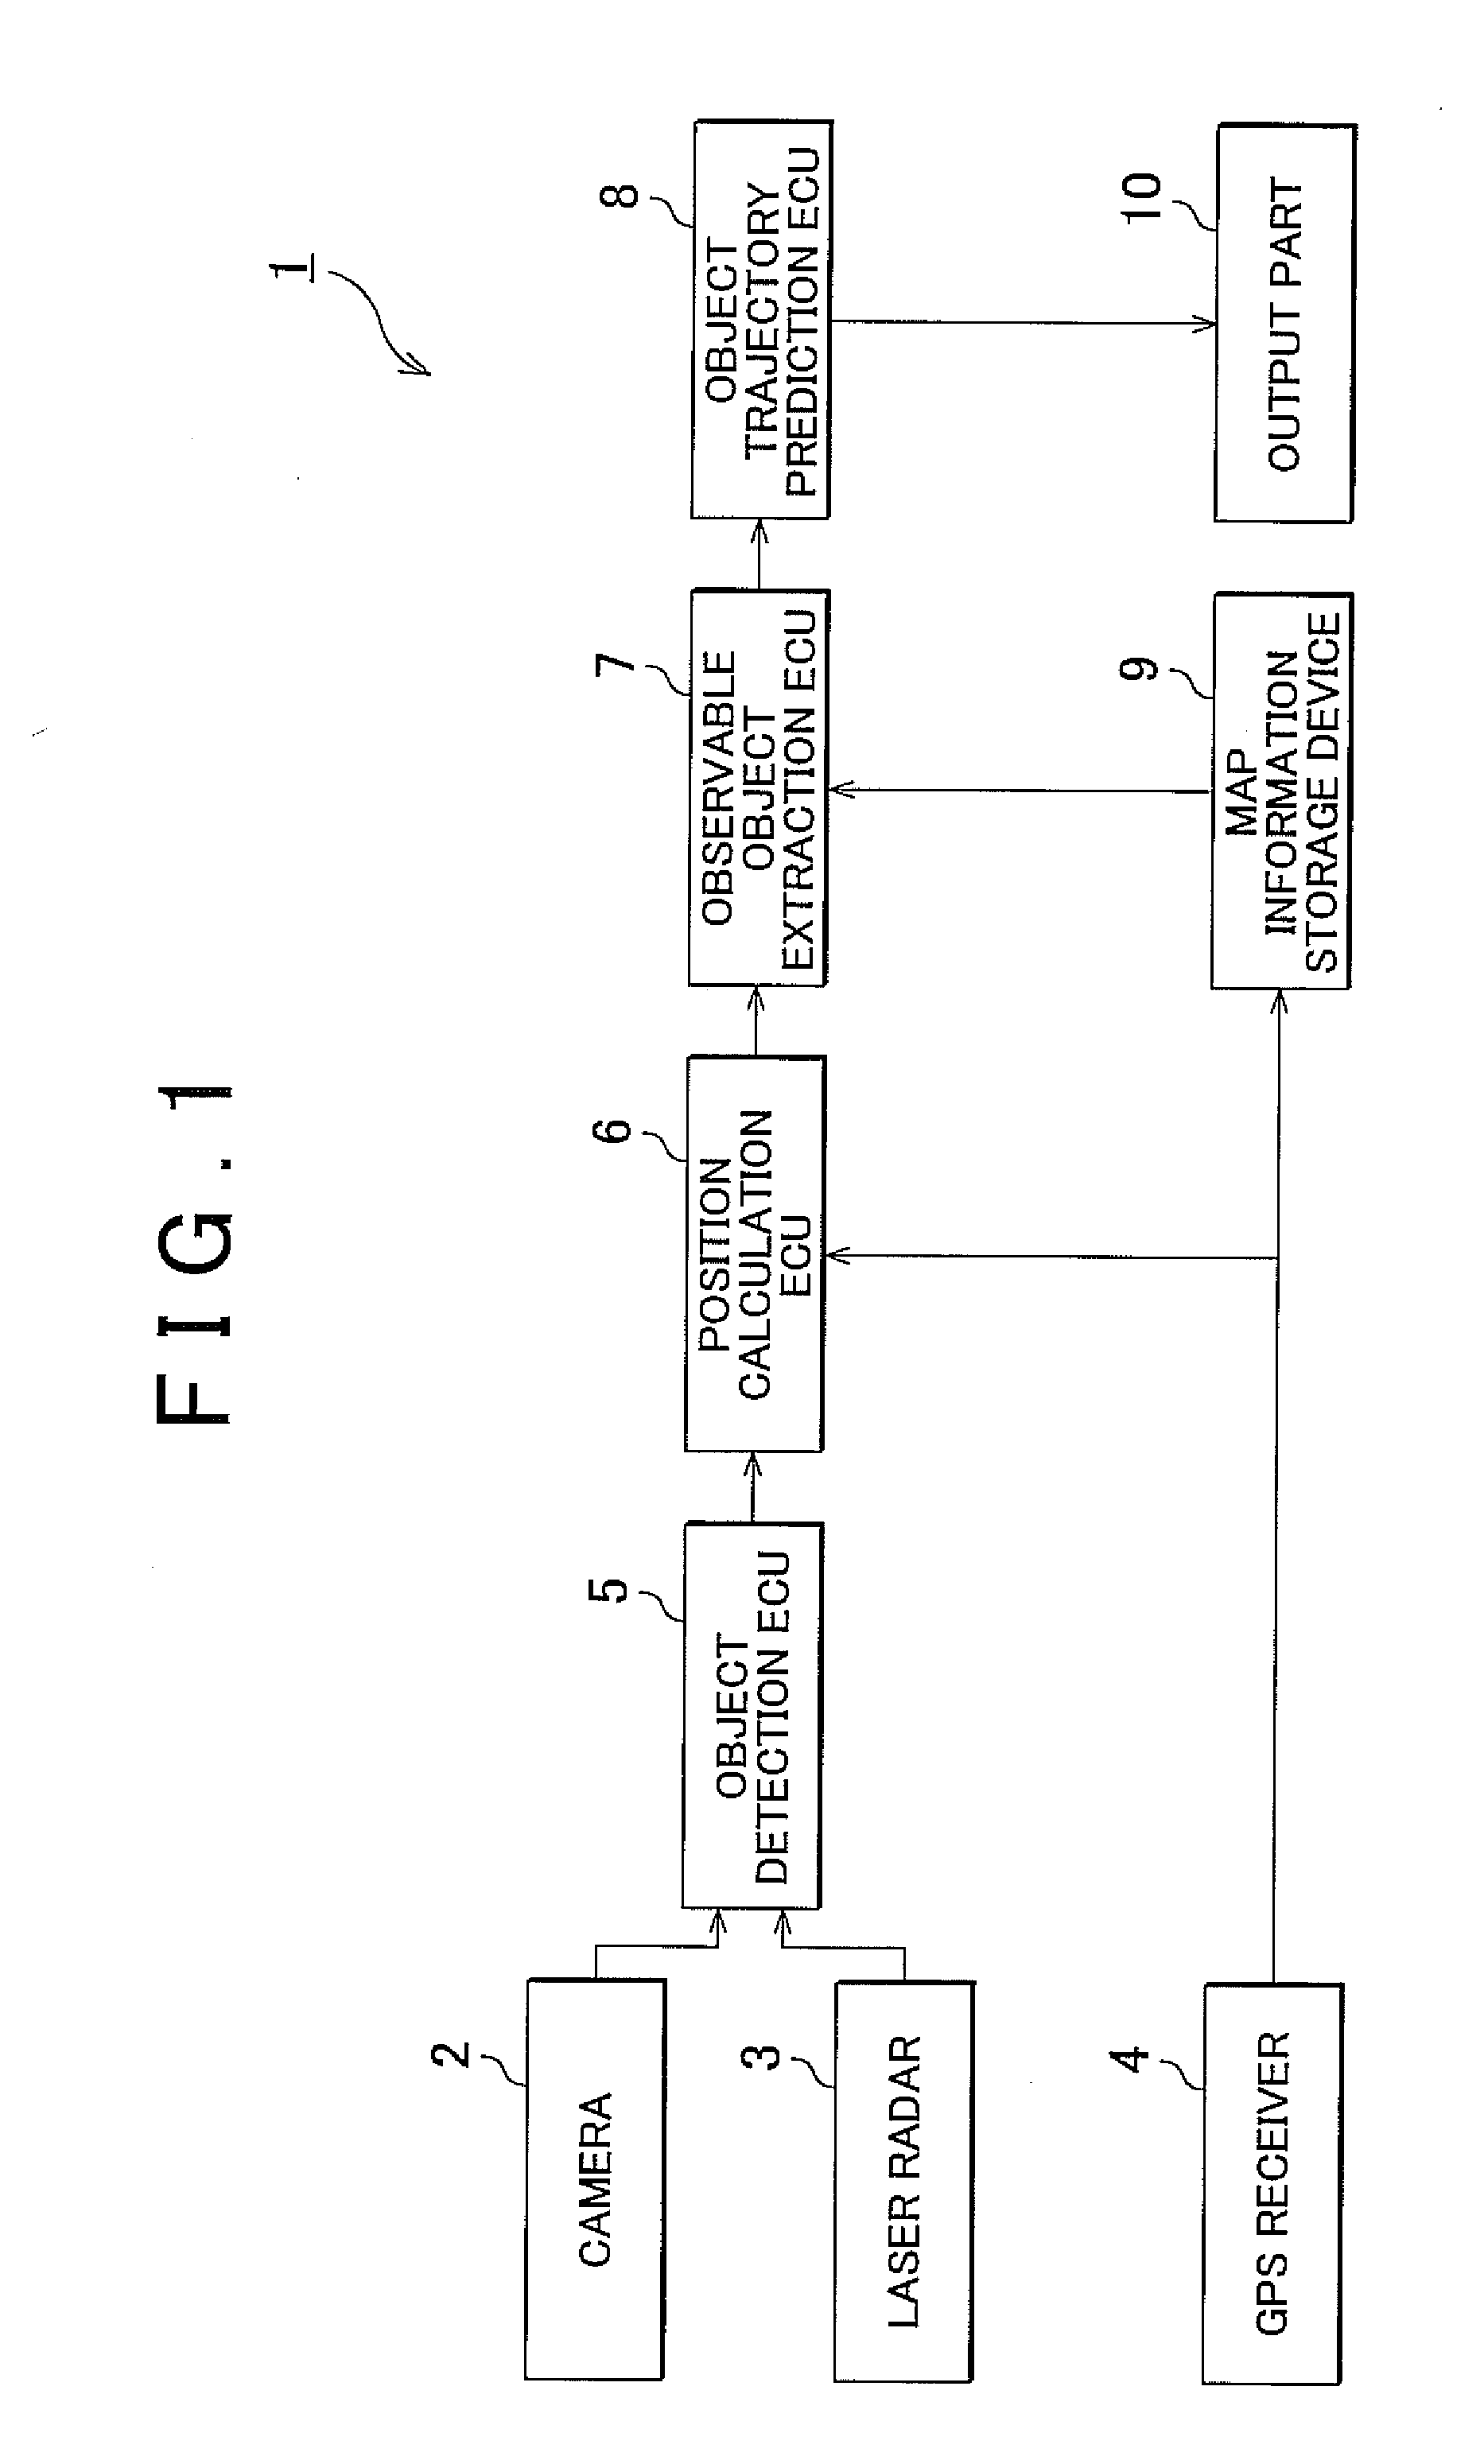 Moving object trajectory estimating device